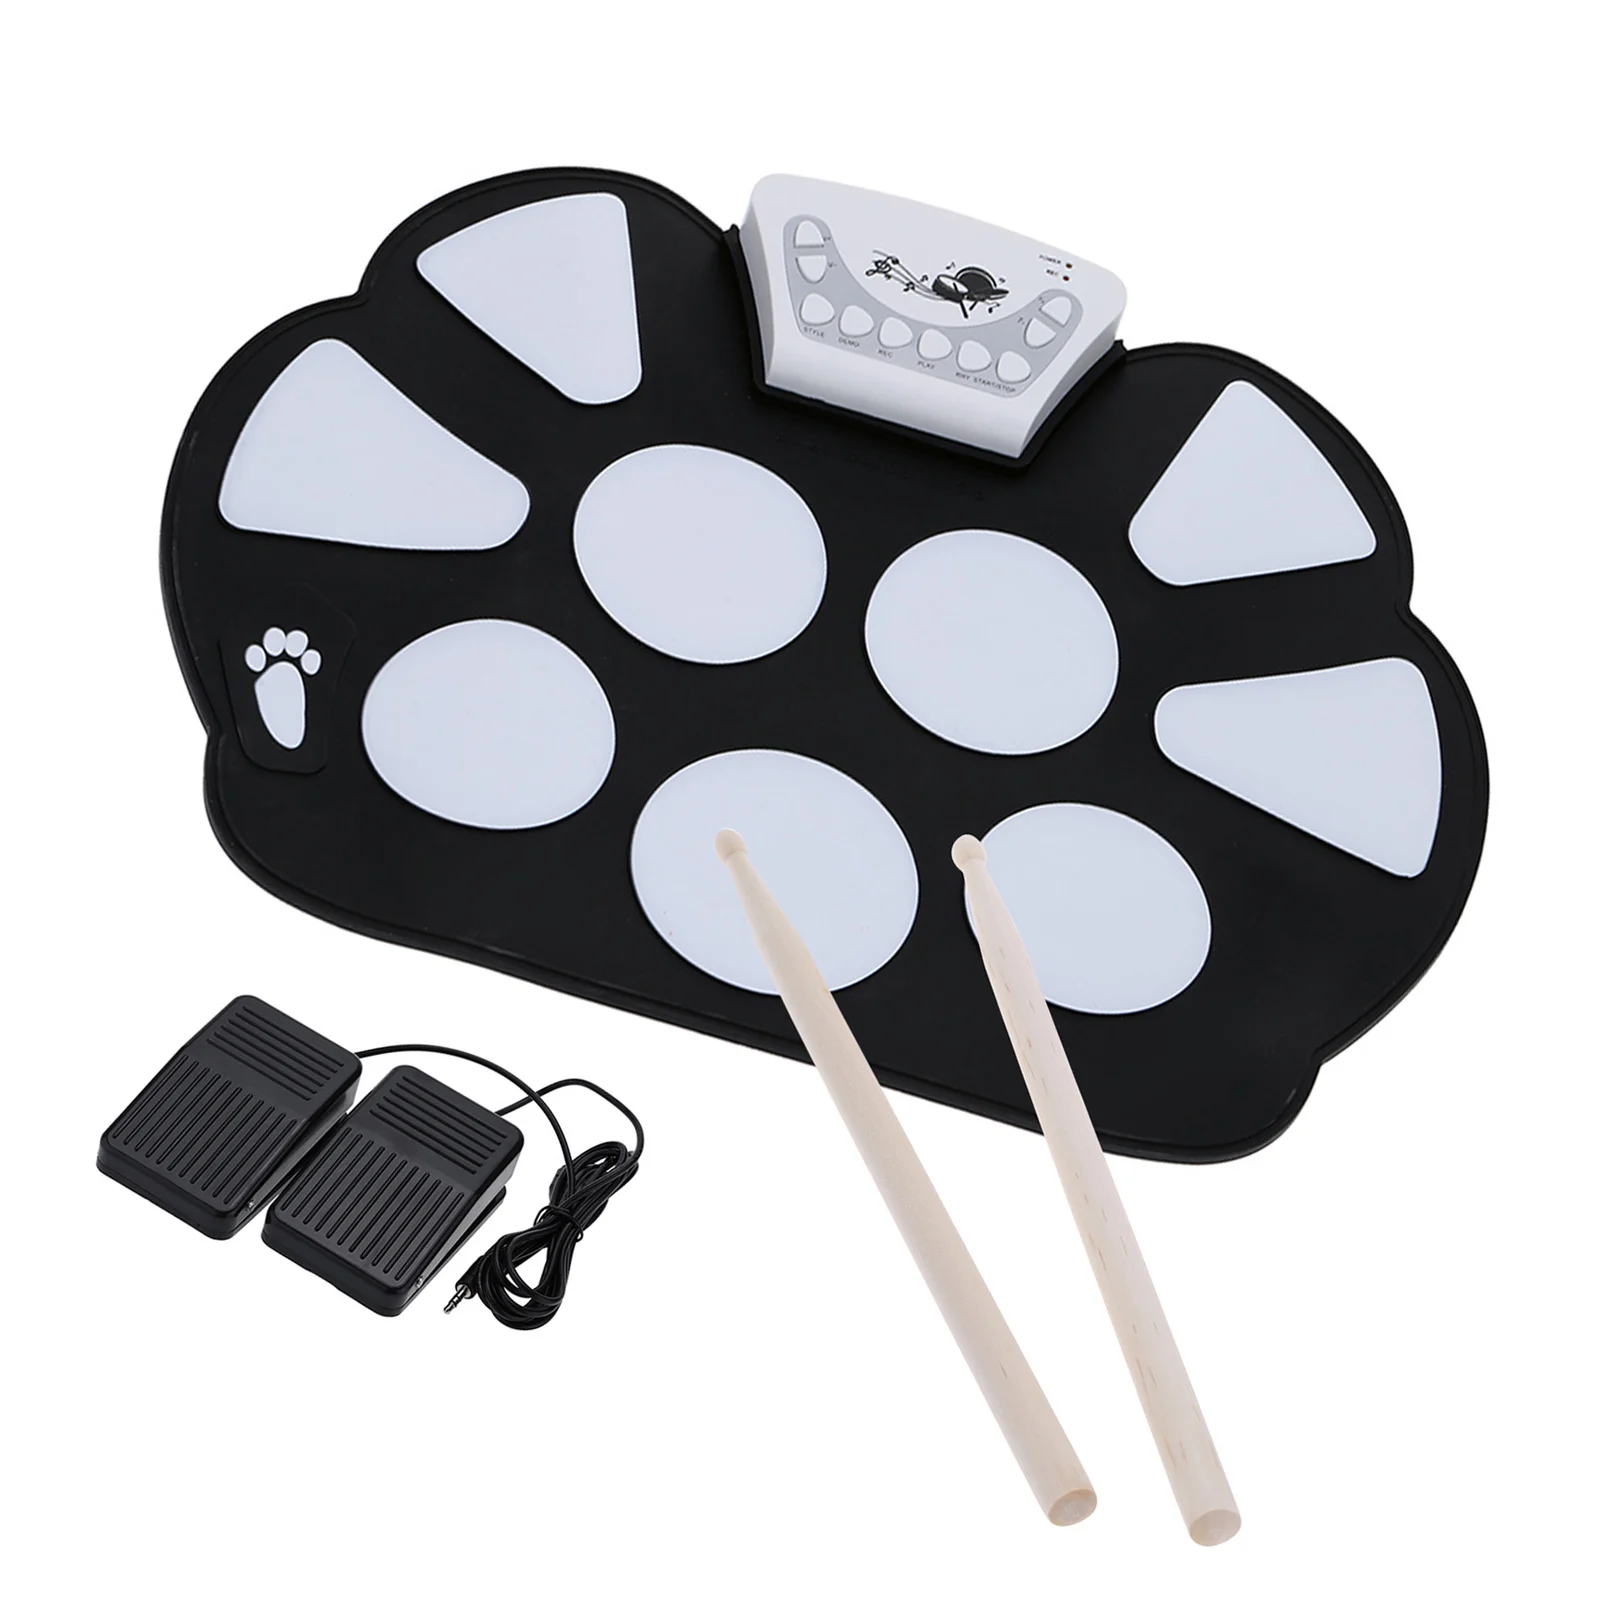 https://ae01.alicdn.com/kf/S8aa007aeb02246128b7fa09d34834f1aH/Compact-Size-Foldable-Silicon-Drum-Digital-Electronic-Drum-Set-Roll-Up-Drum-Pad-Kit-with-Drumsticks.jpg